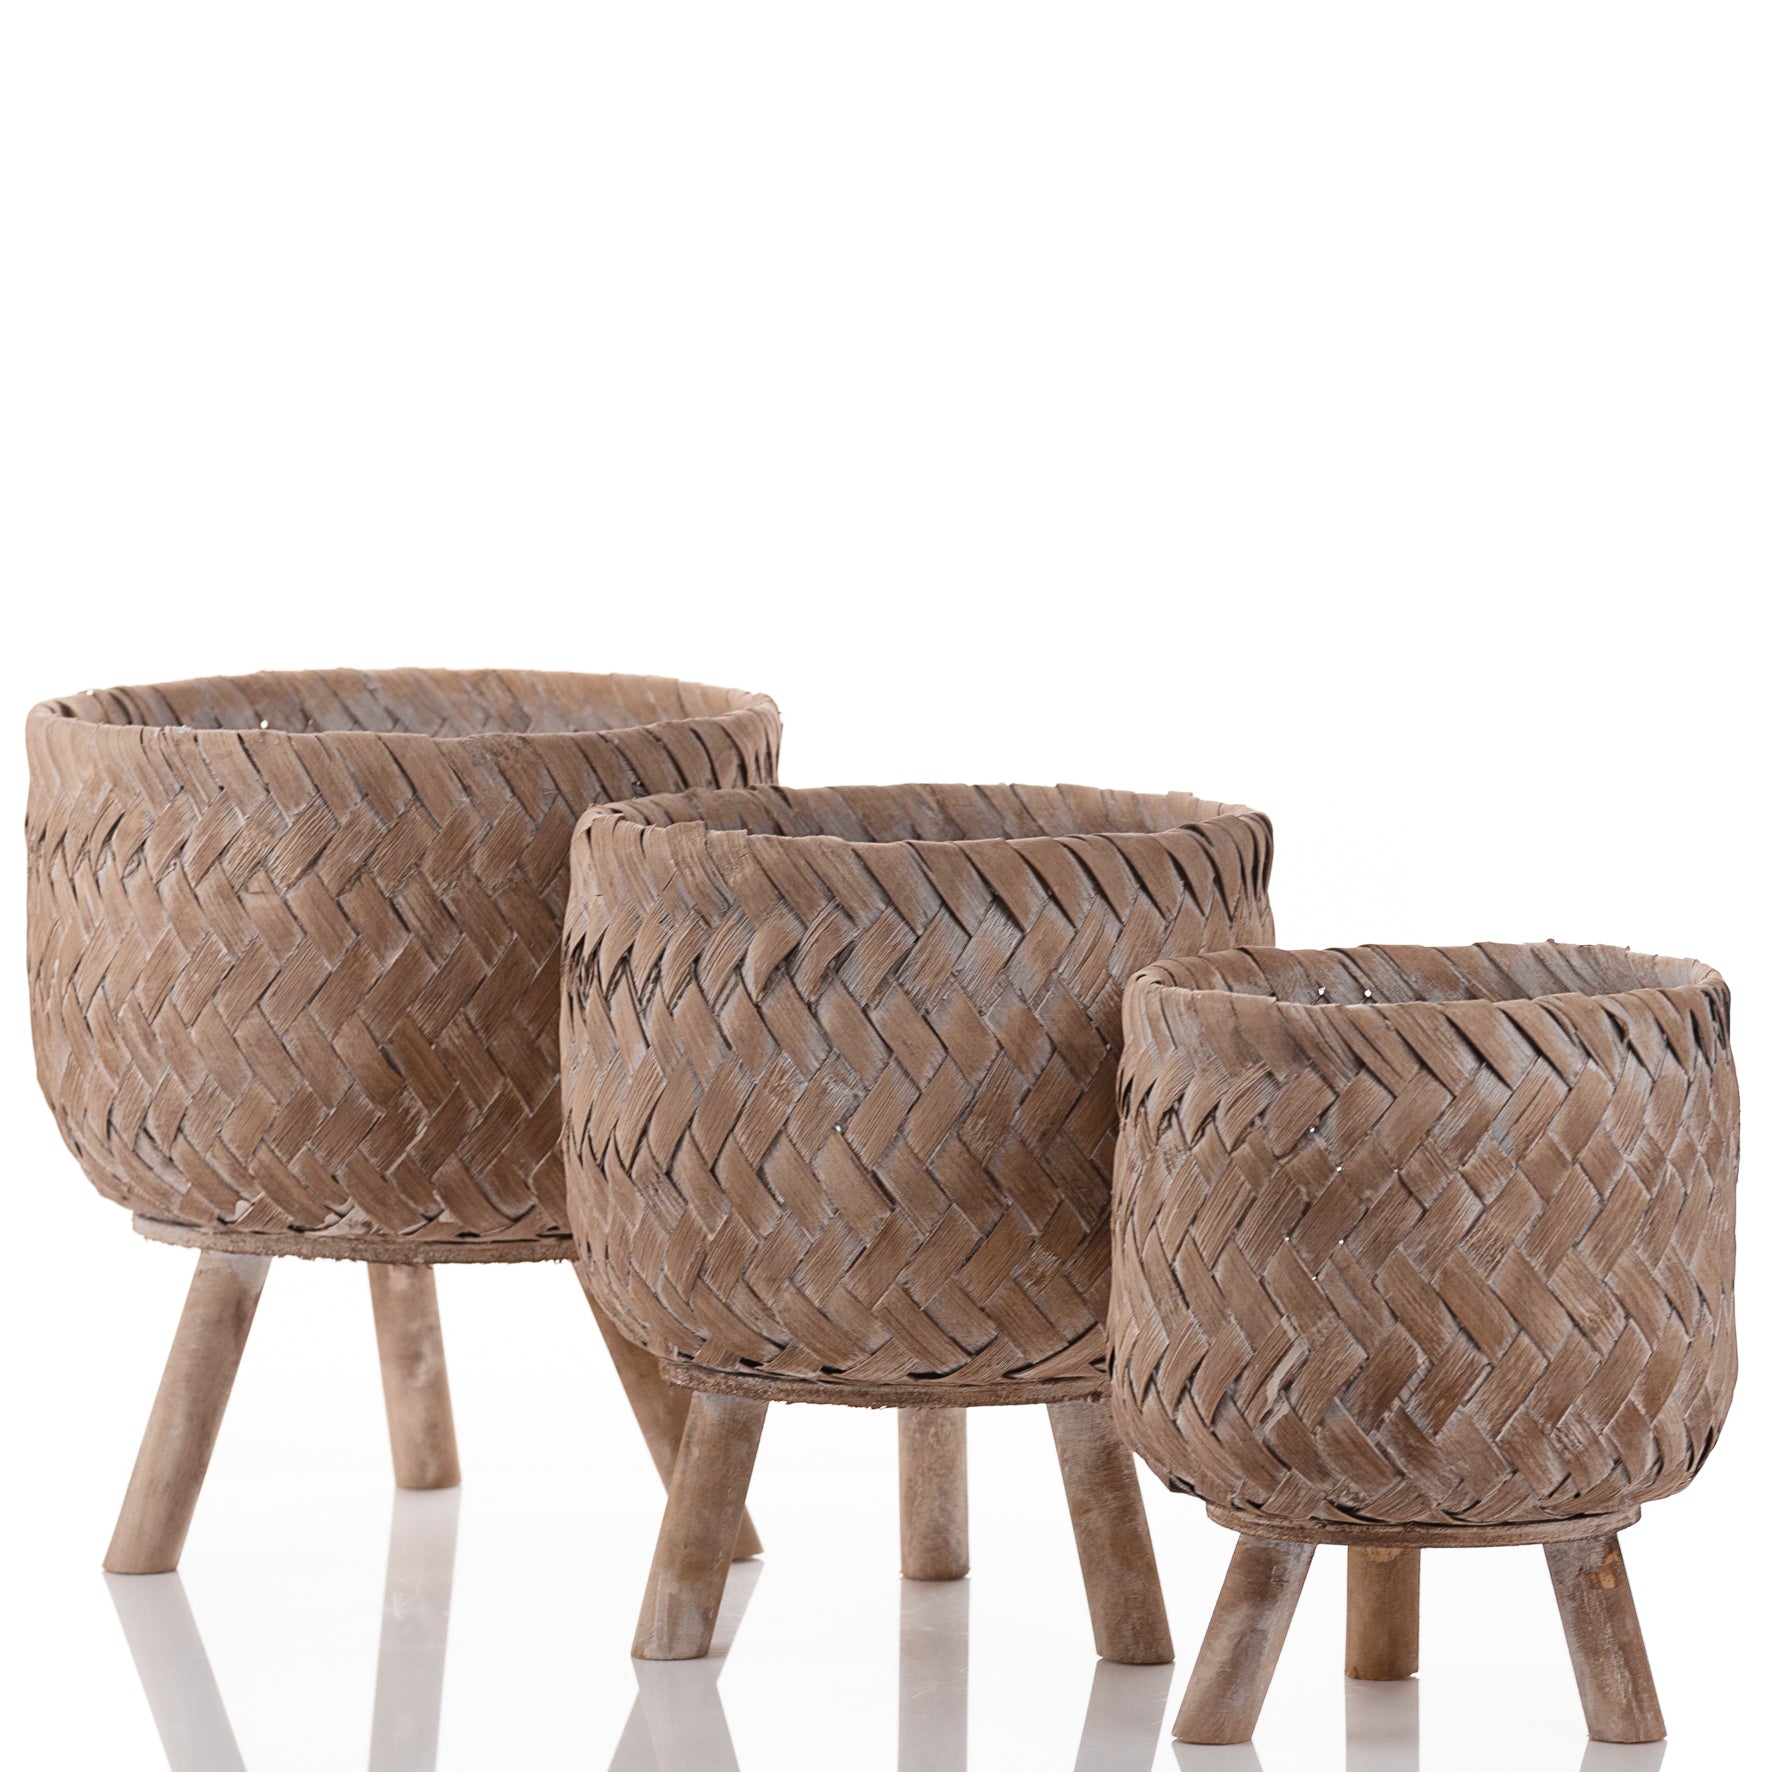 Set of 3 Woven Bamboo Indoor Footed Planters